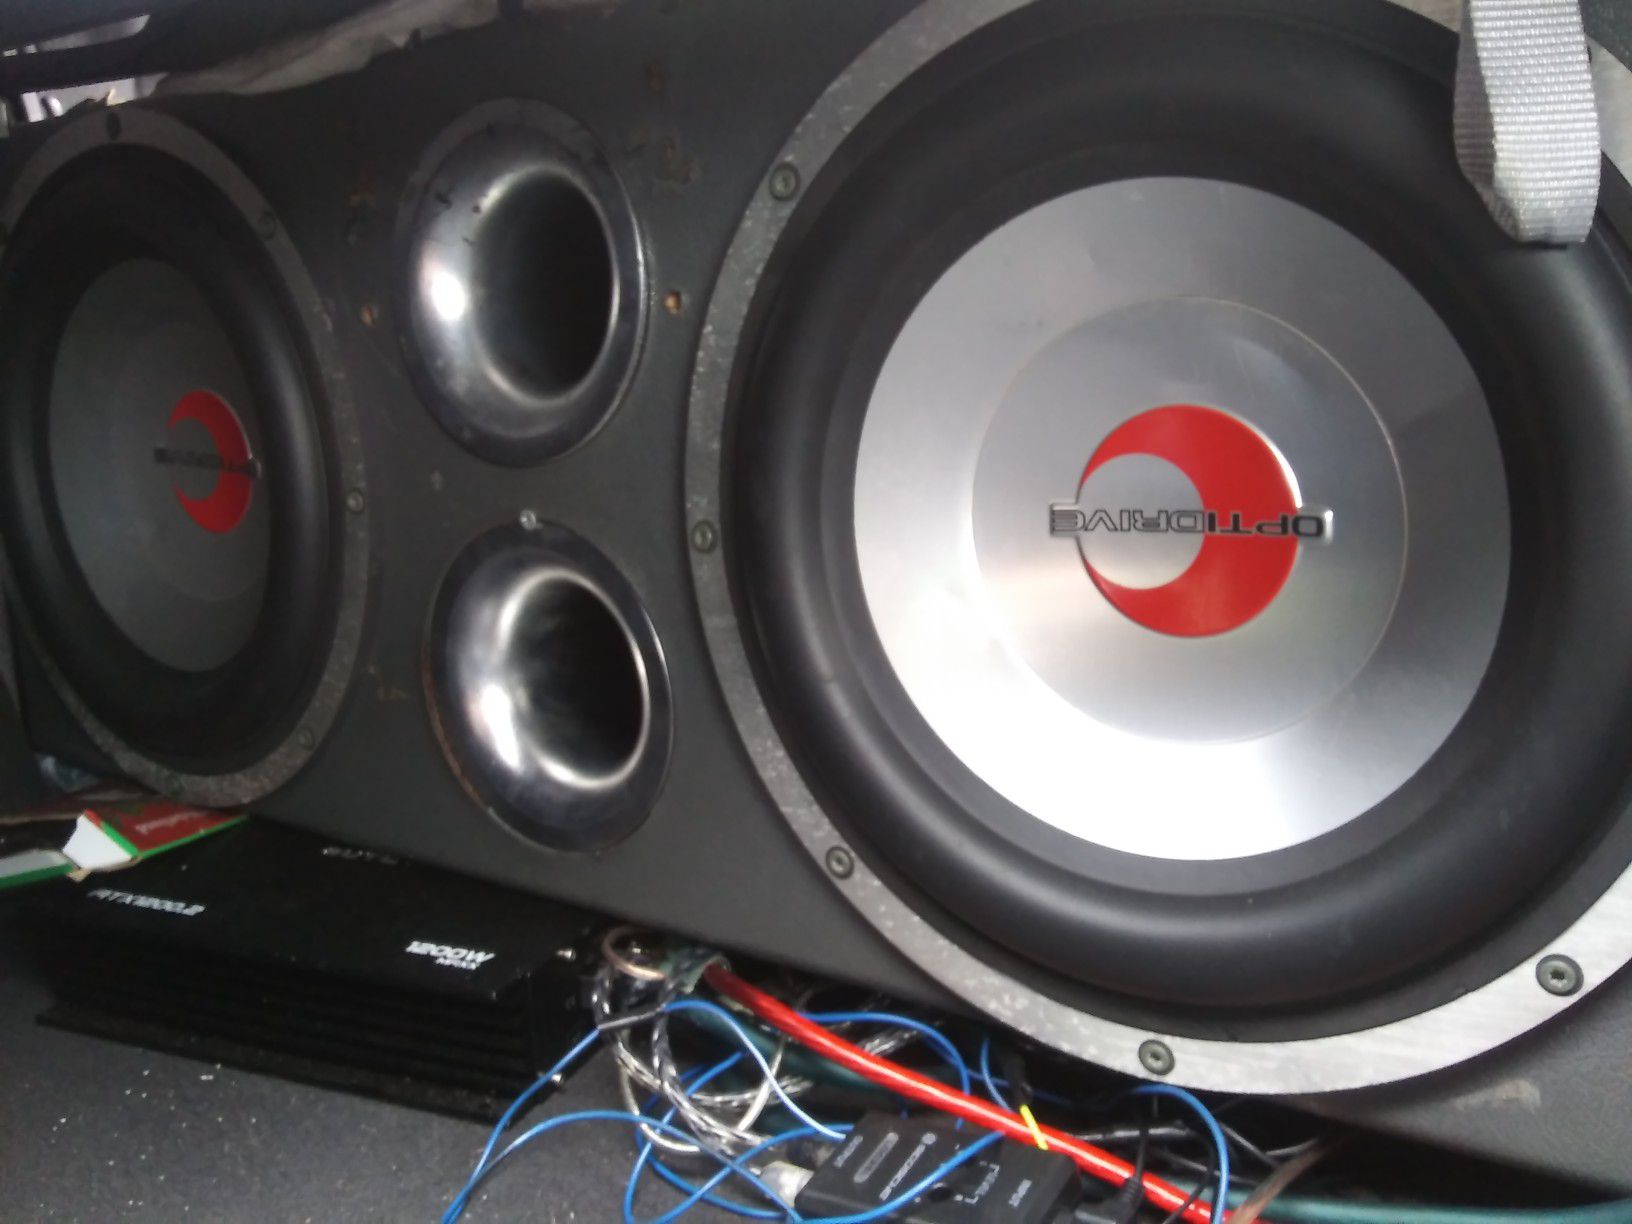 Big boy 12 inch speakers knock have a 1200 amp